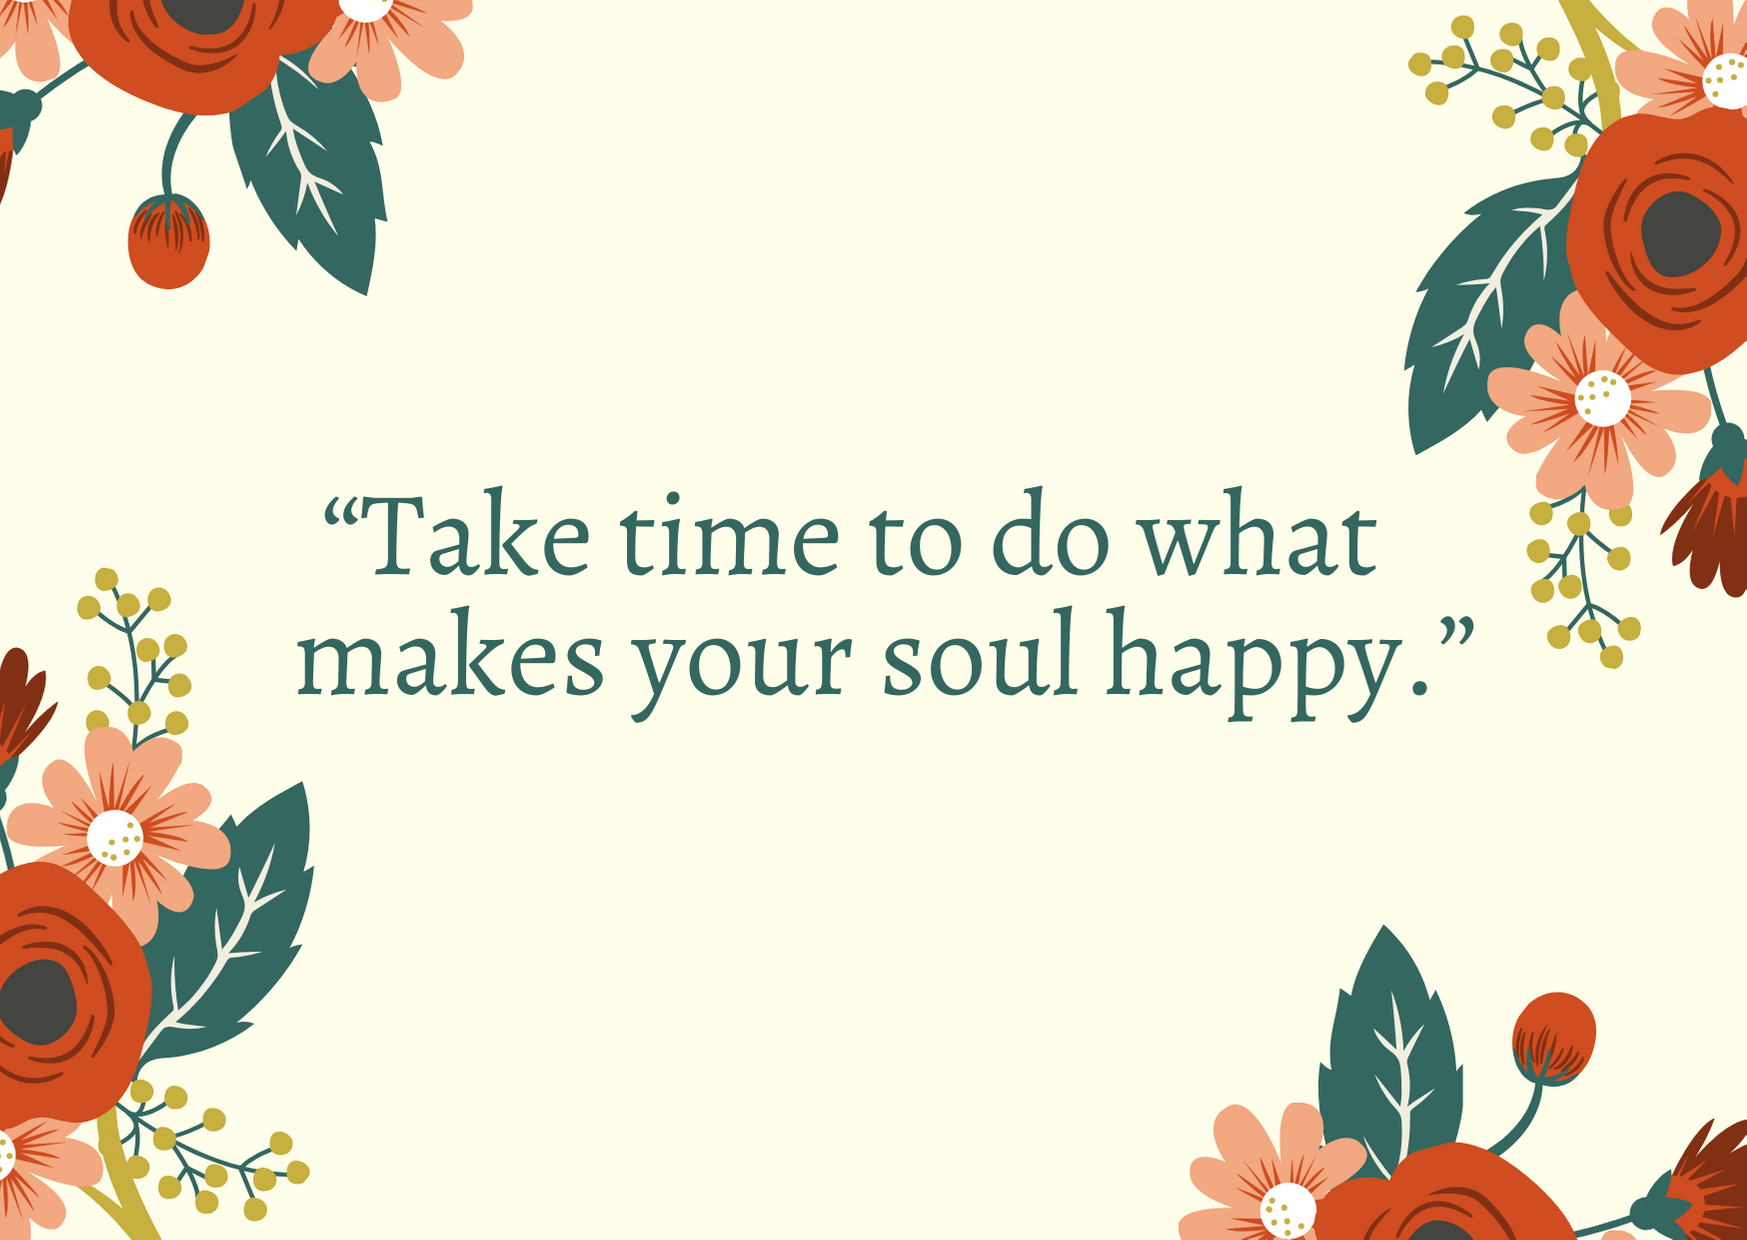 image with floral pattern that says, "take time to do what makes your soul happy"